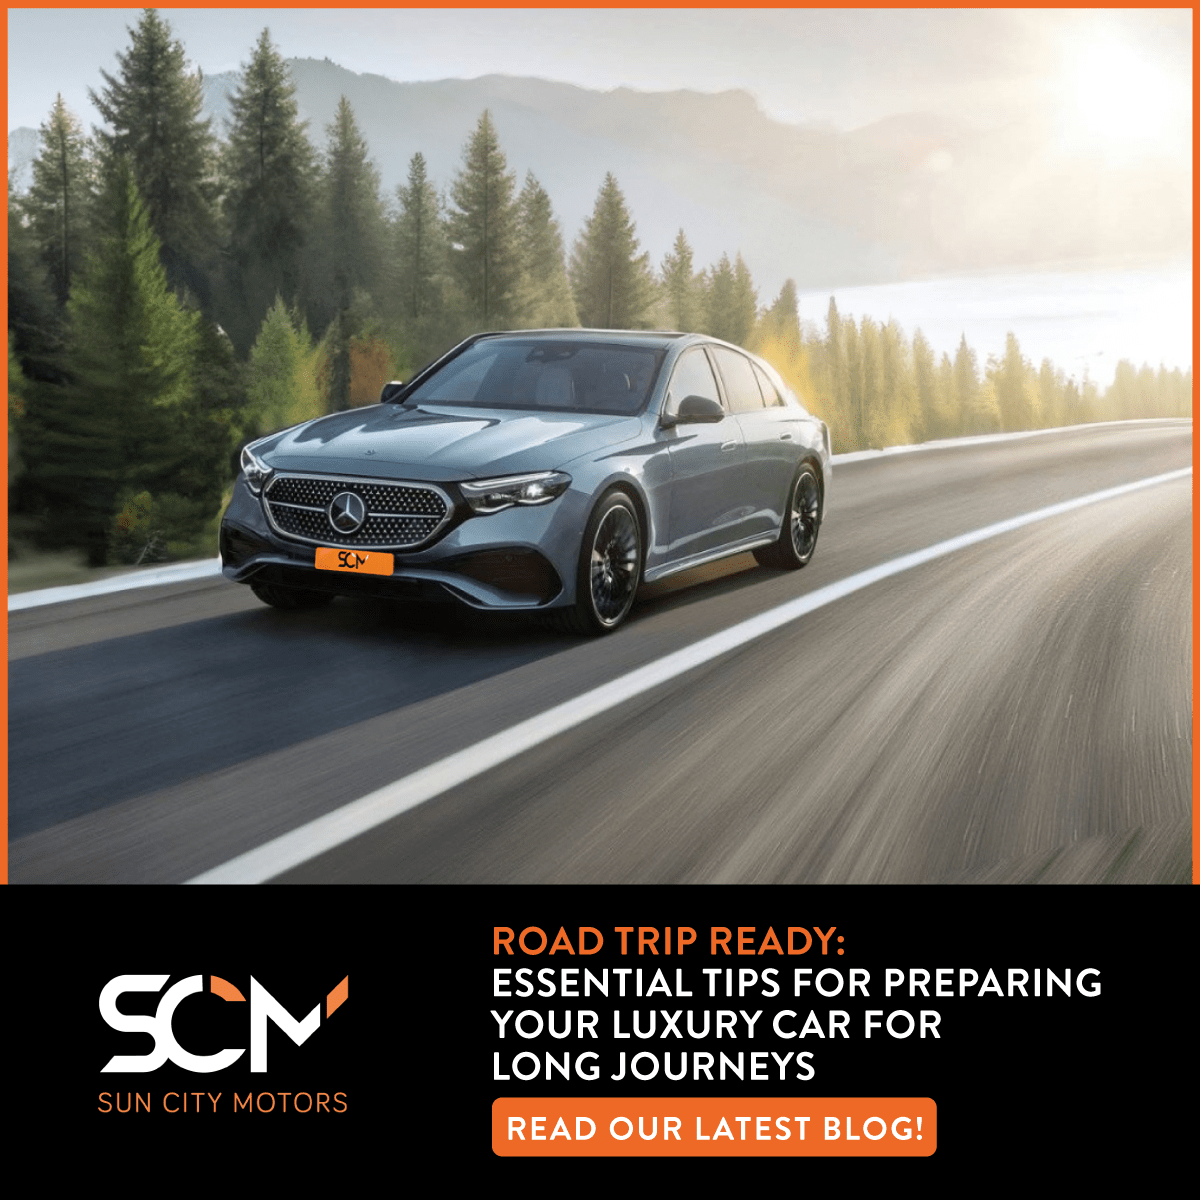 Preparing Your Luxury Car For Long Journeys